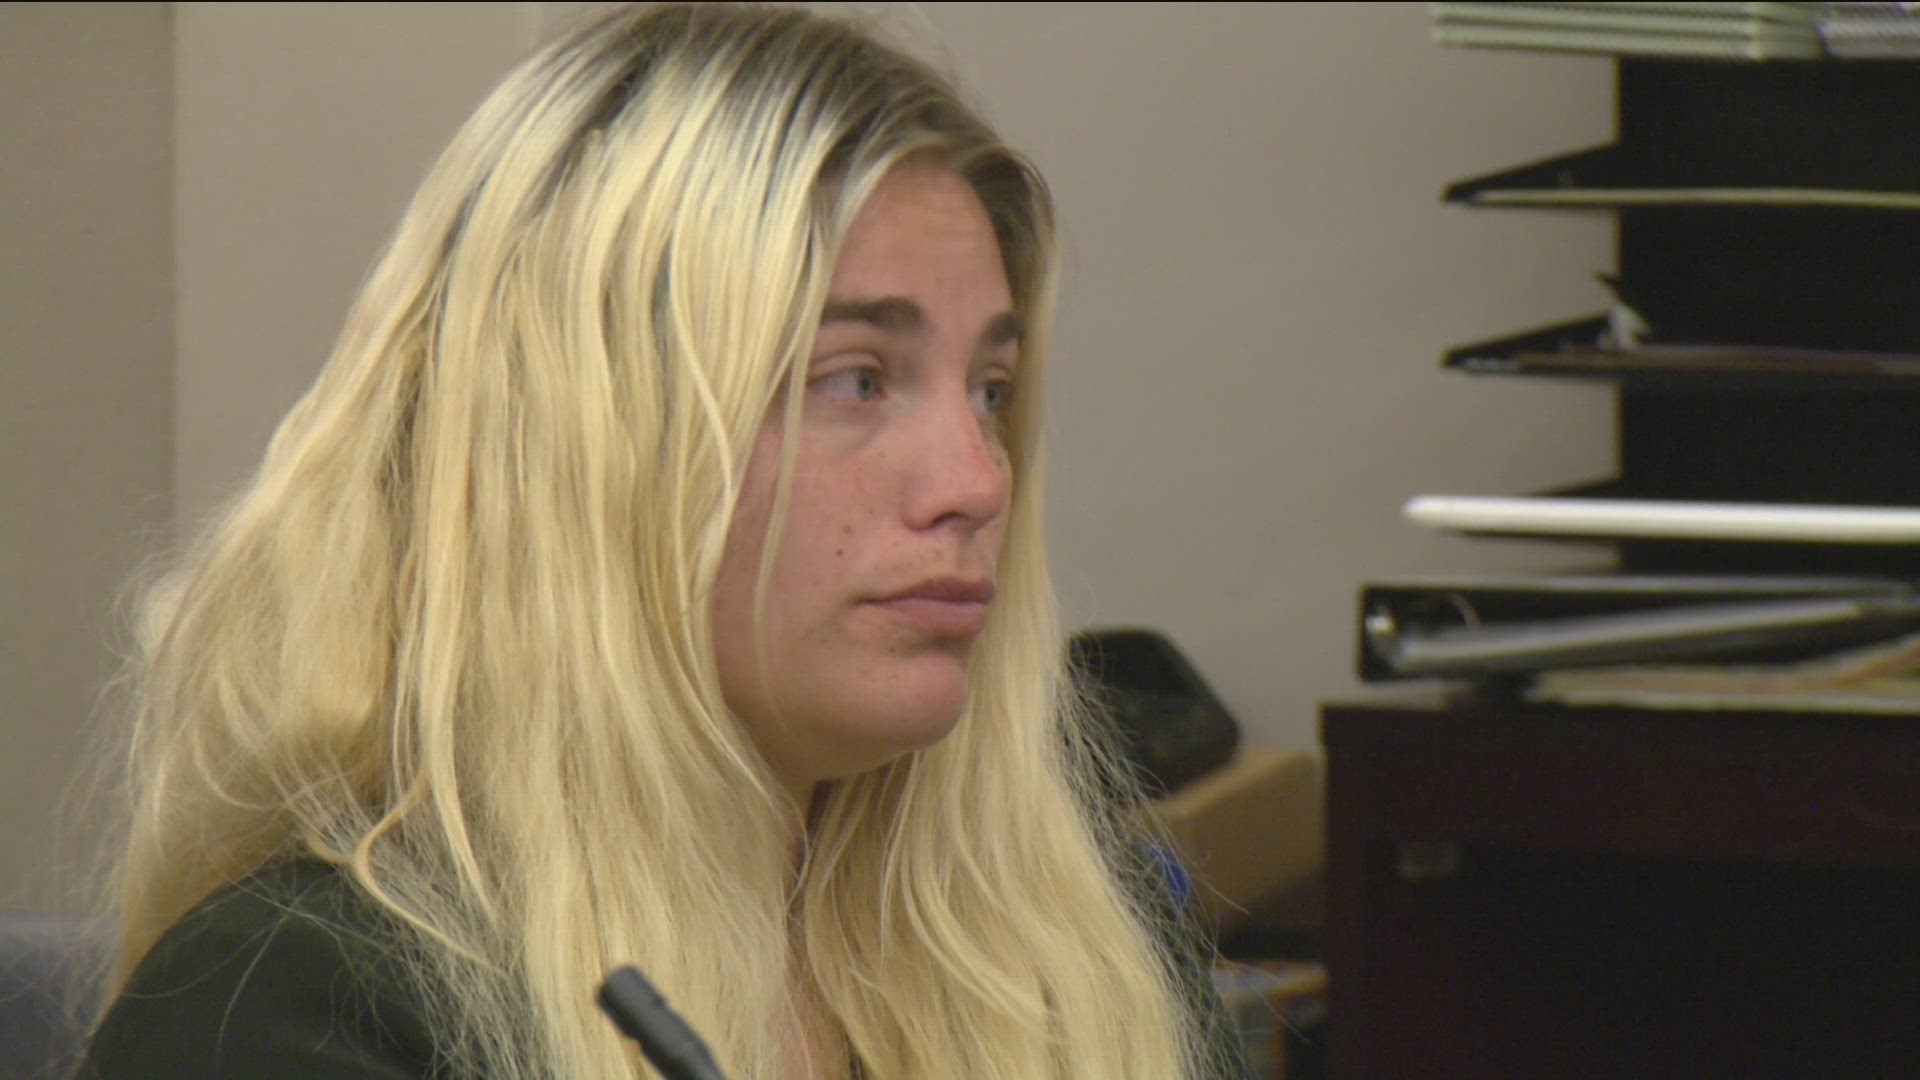 Wednesday morning a judge ordered her to return all dogs in her possession to their owners. Russell told CBS 8 there is no proof of the allegations.